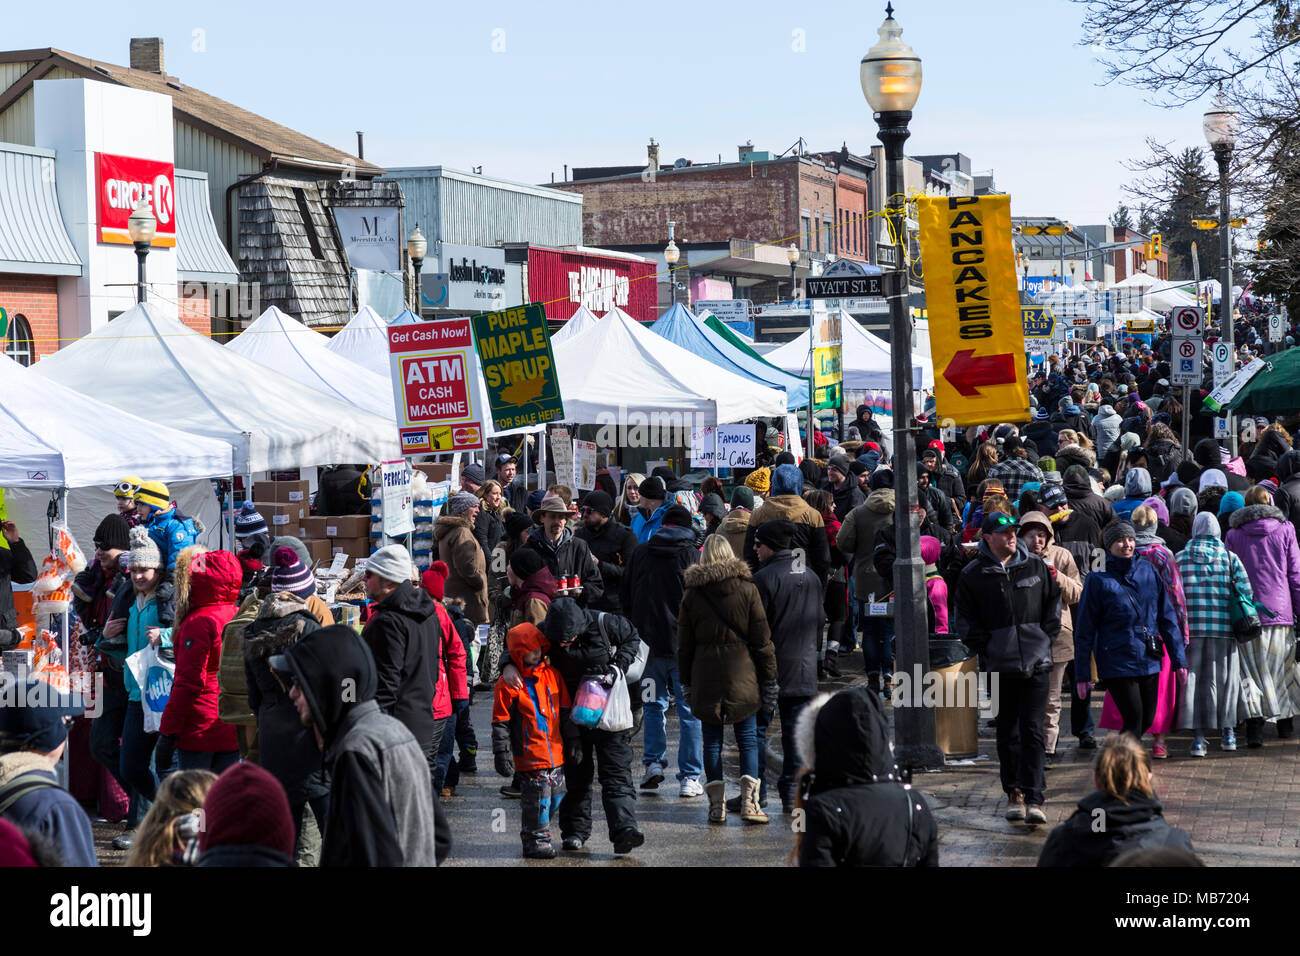 Elmira, Ontario Canada. 07 April 2018. Elmira Maple Syrup Festival 2018, World's largest single day syrup festival. Large crowds enjoying at the maple syrup festival. Performance Image/Alamy Live News Stock Photo